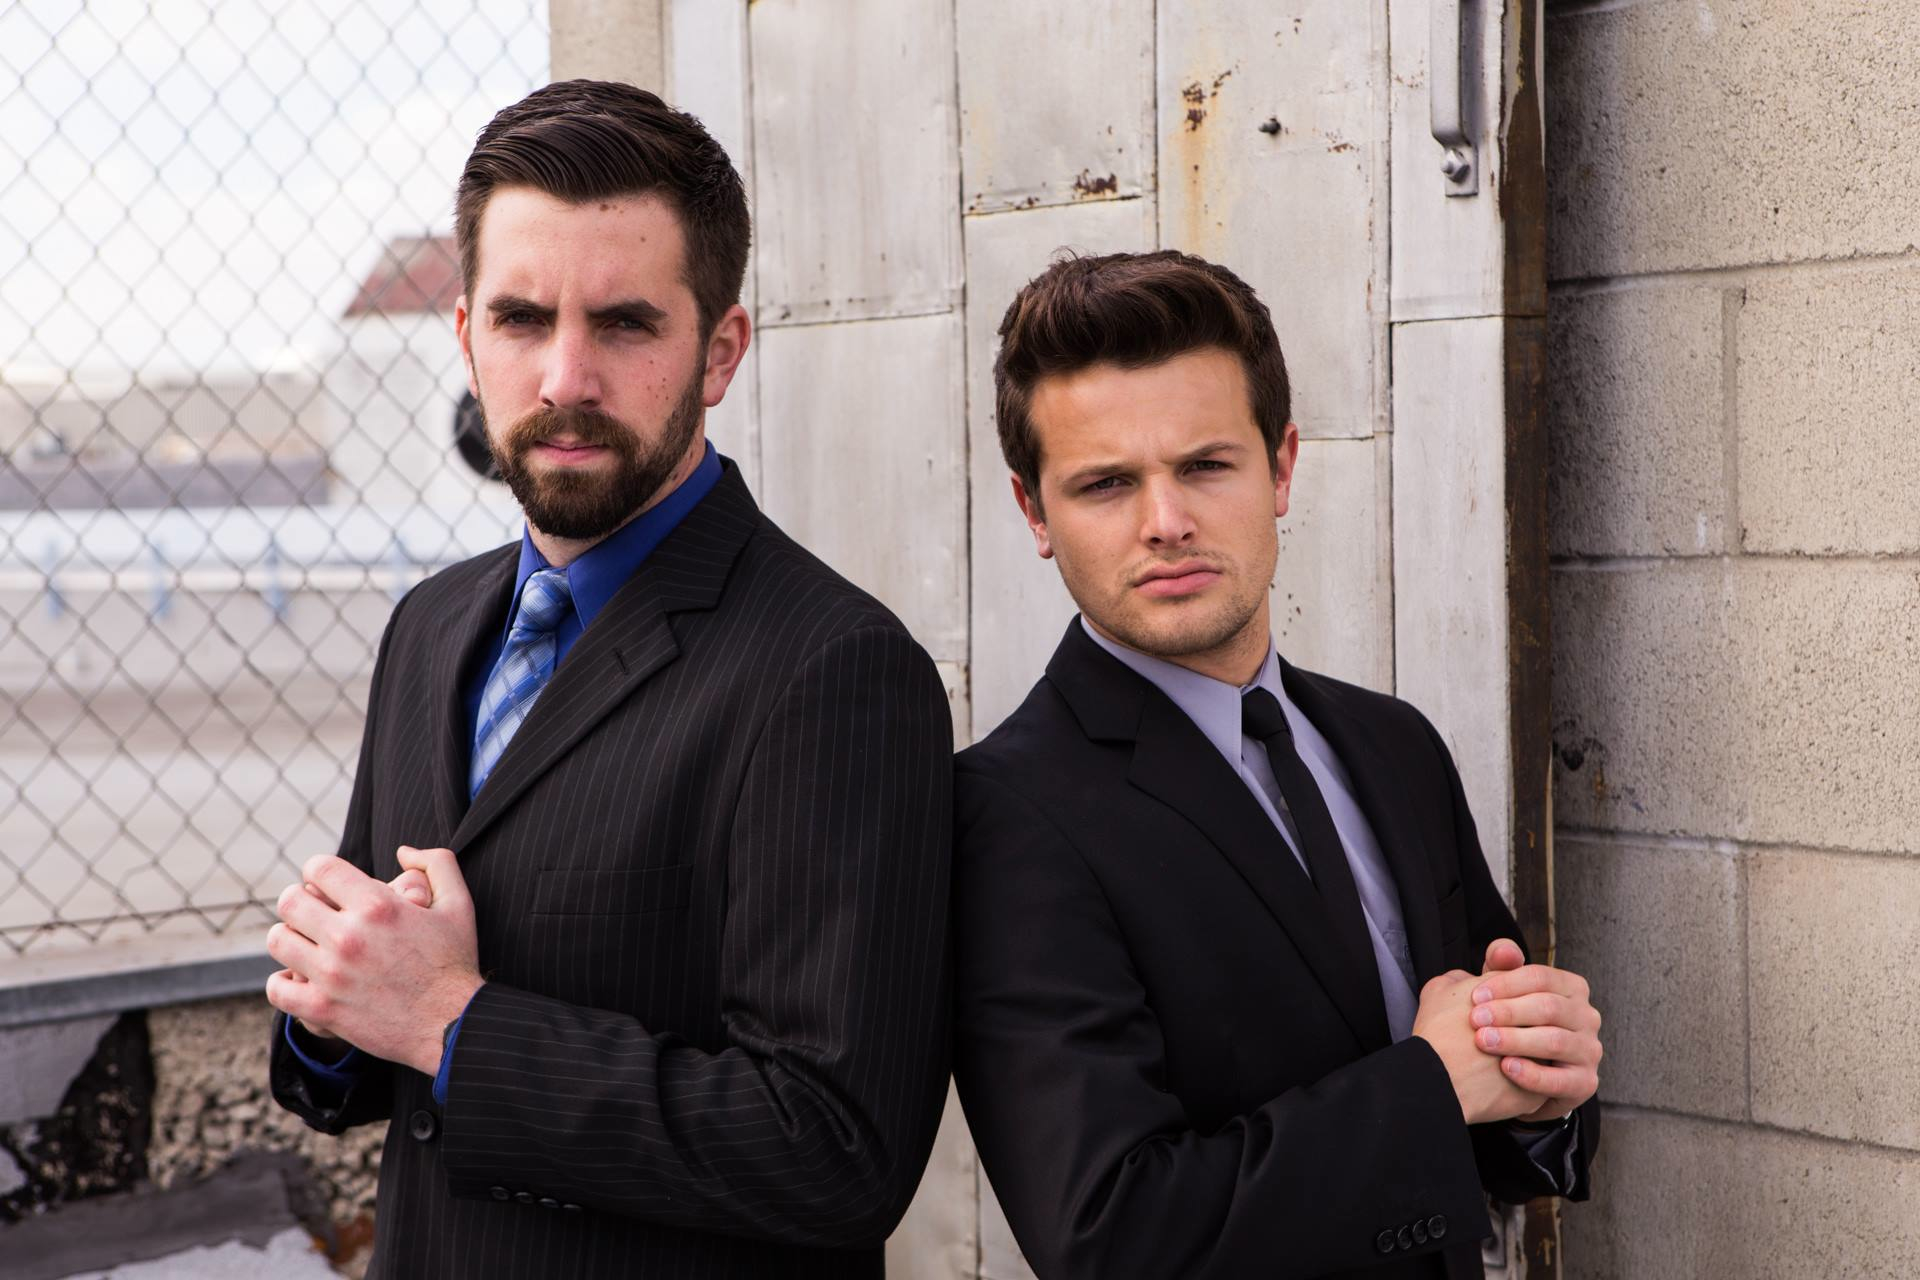 Mark Sipka and Trent Bruce in 2 Guys Running In Suits.